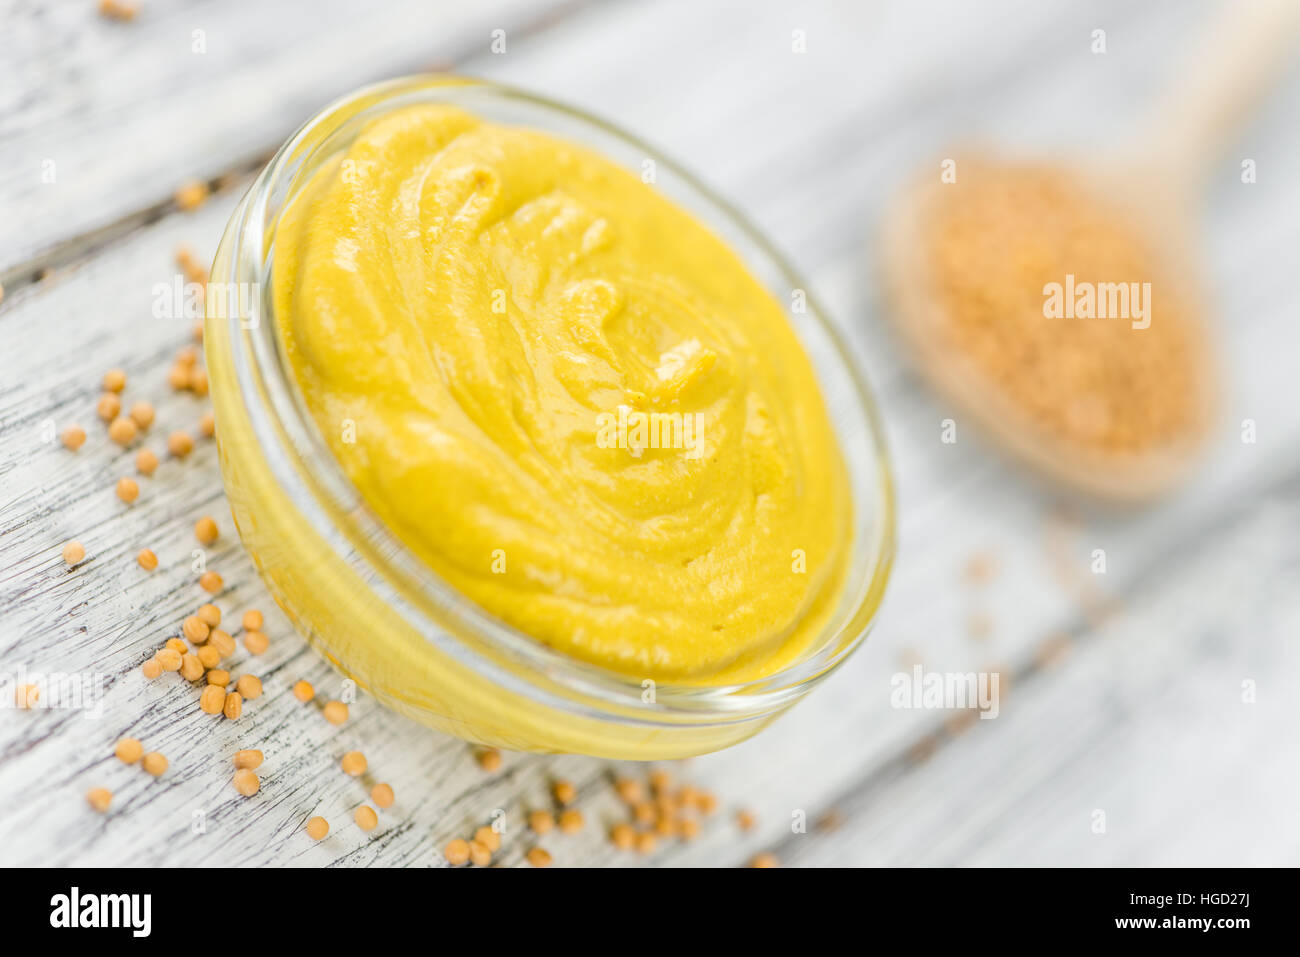 Portion of homemade Mustard on wooden background (selective focus; close-up shot) Stock Photo